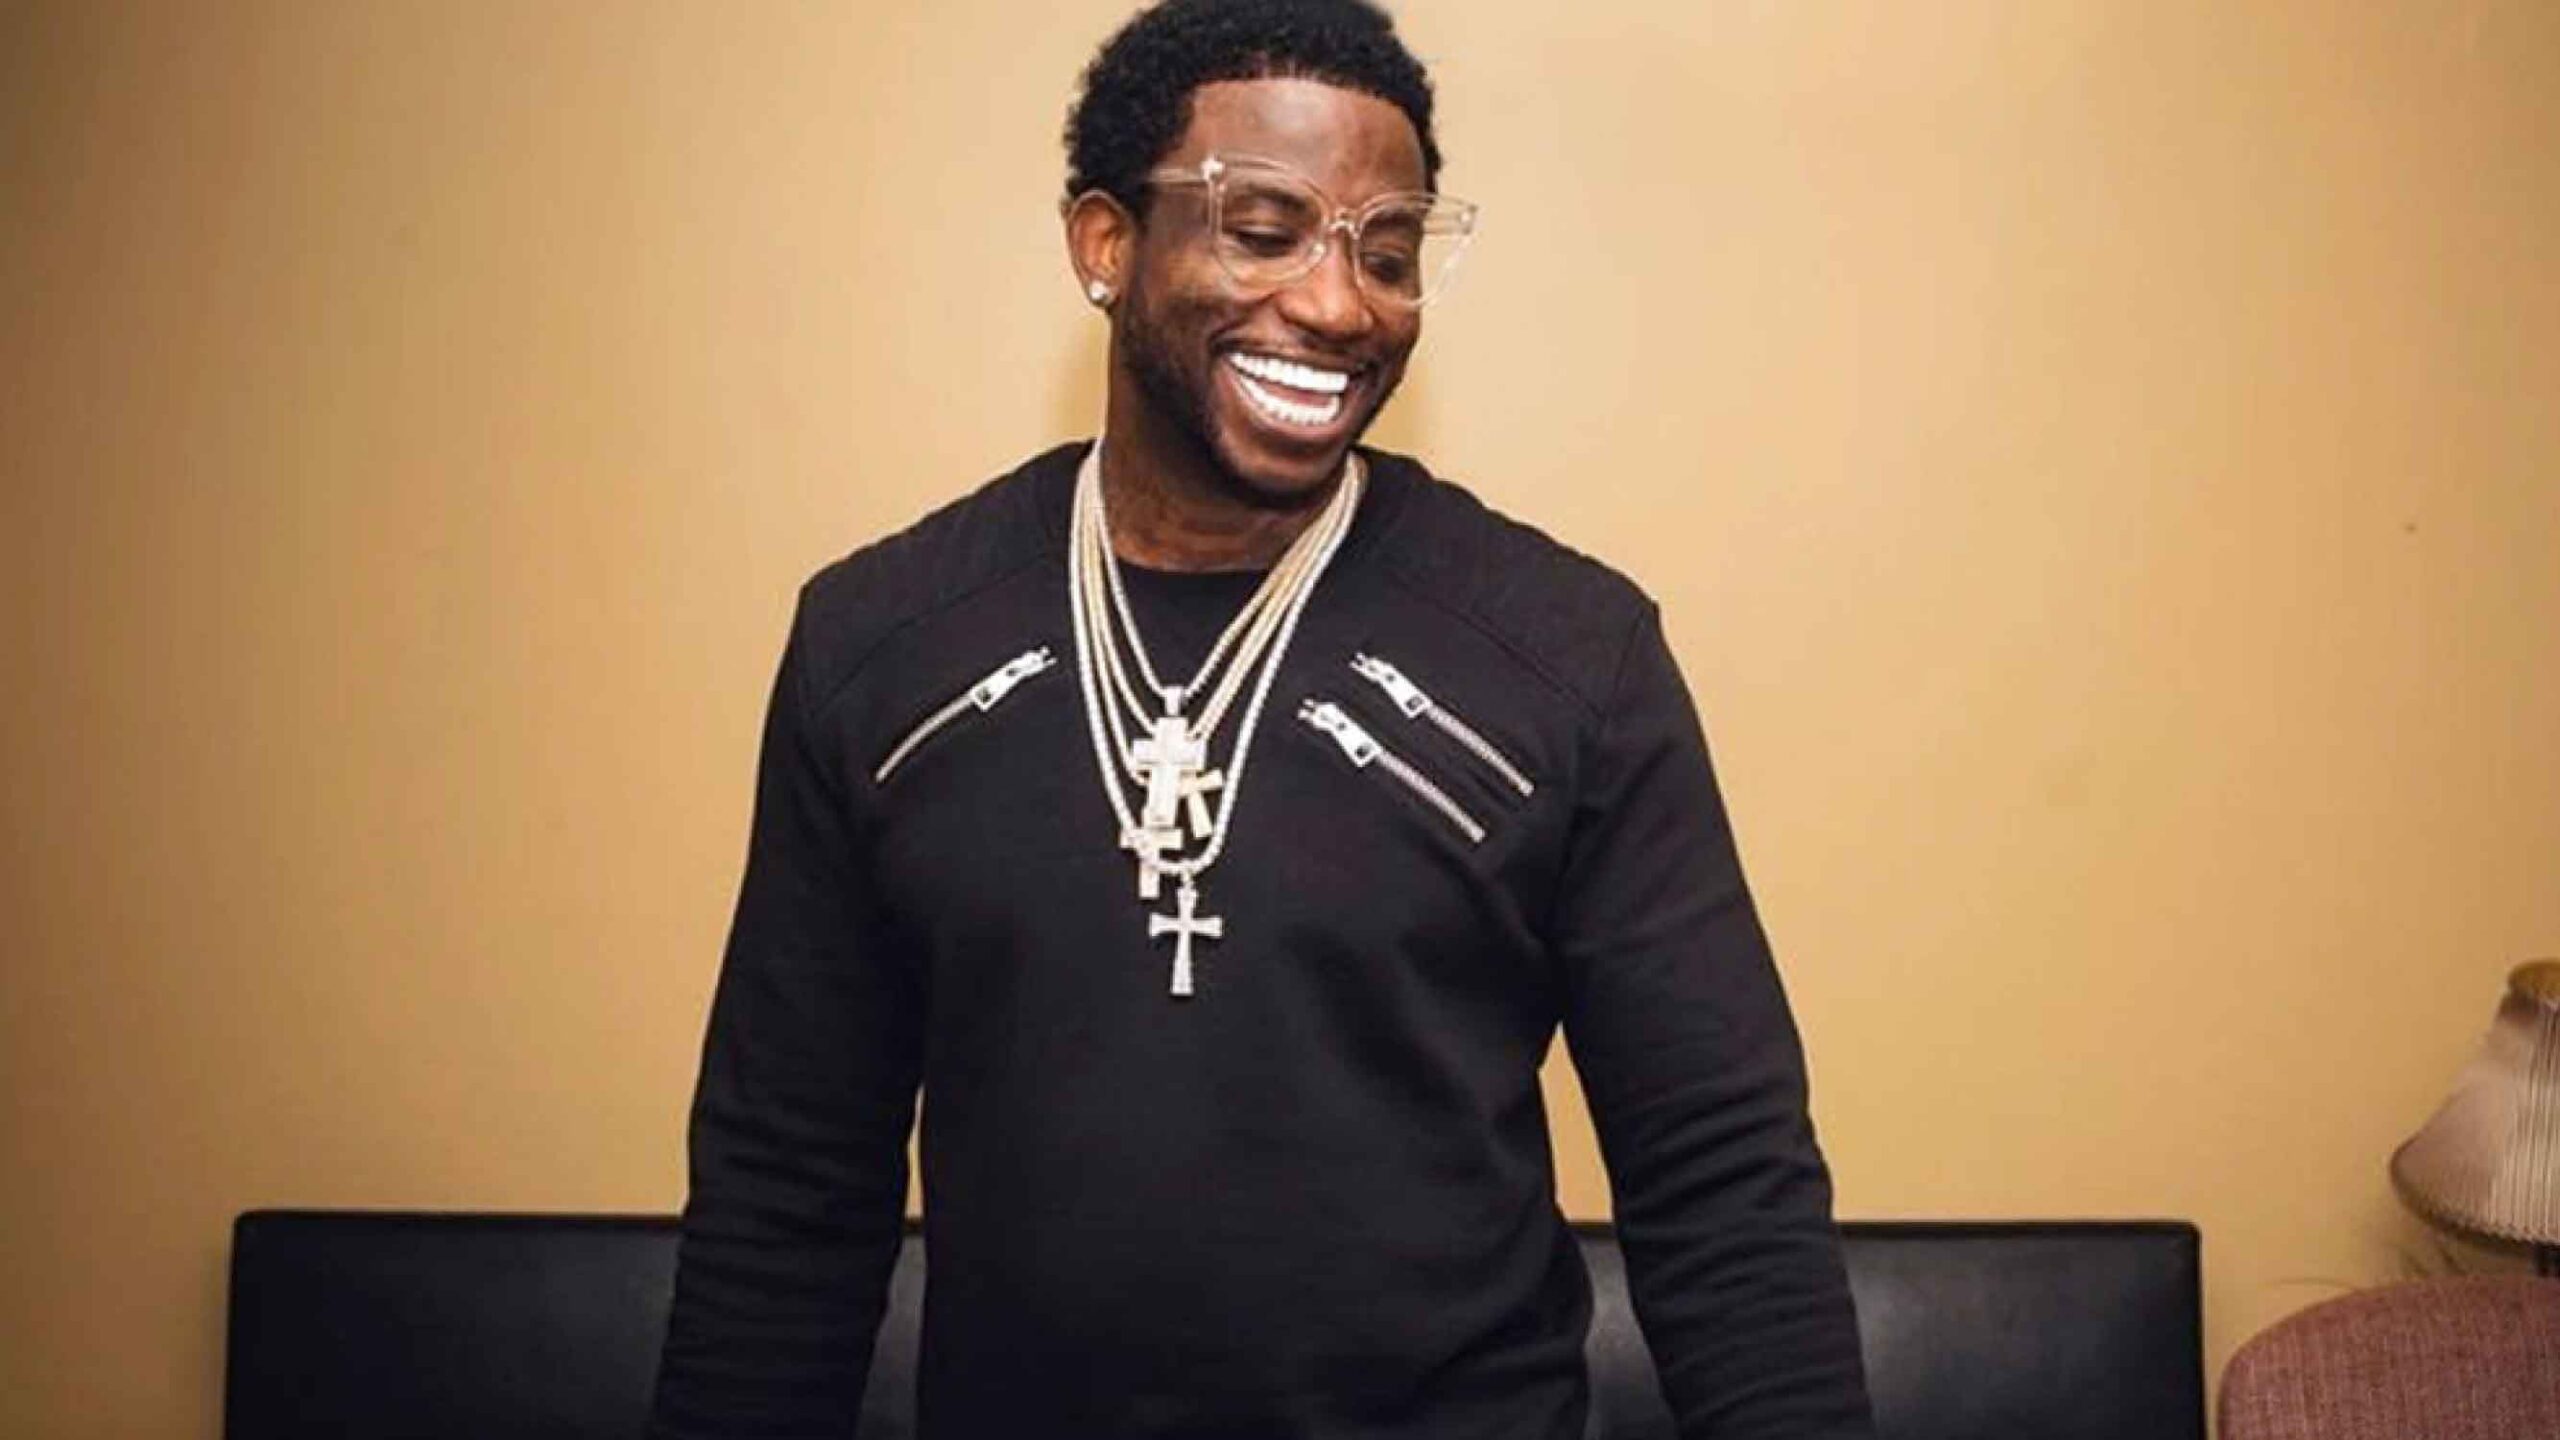 Gucci Mane's Net Worth in 2022 [Facts & Figures] 